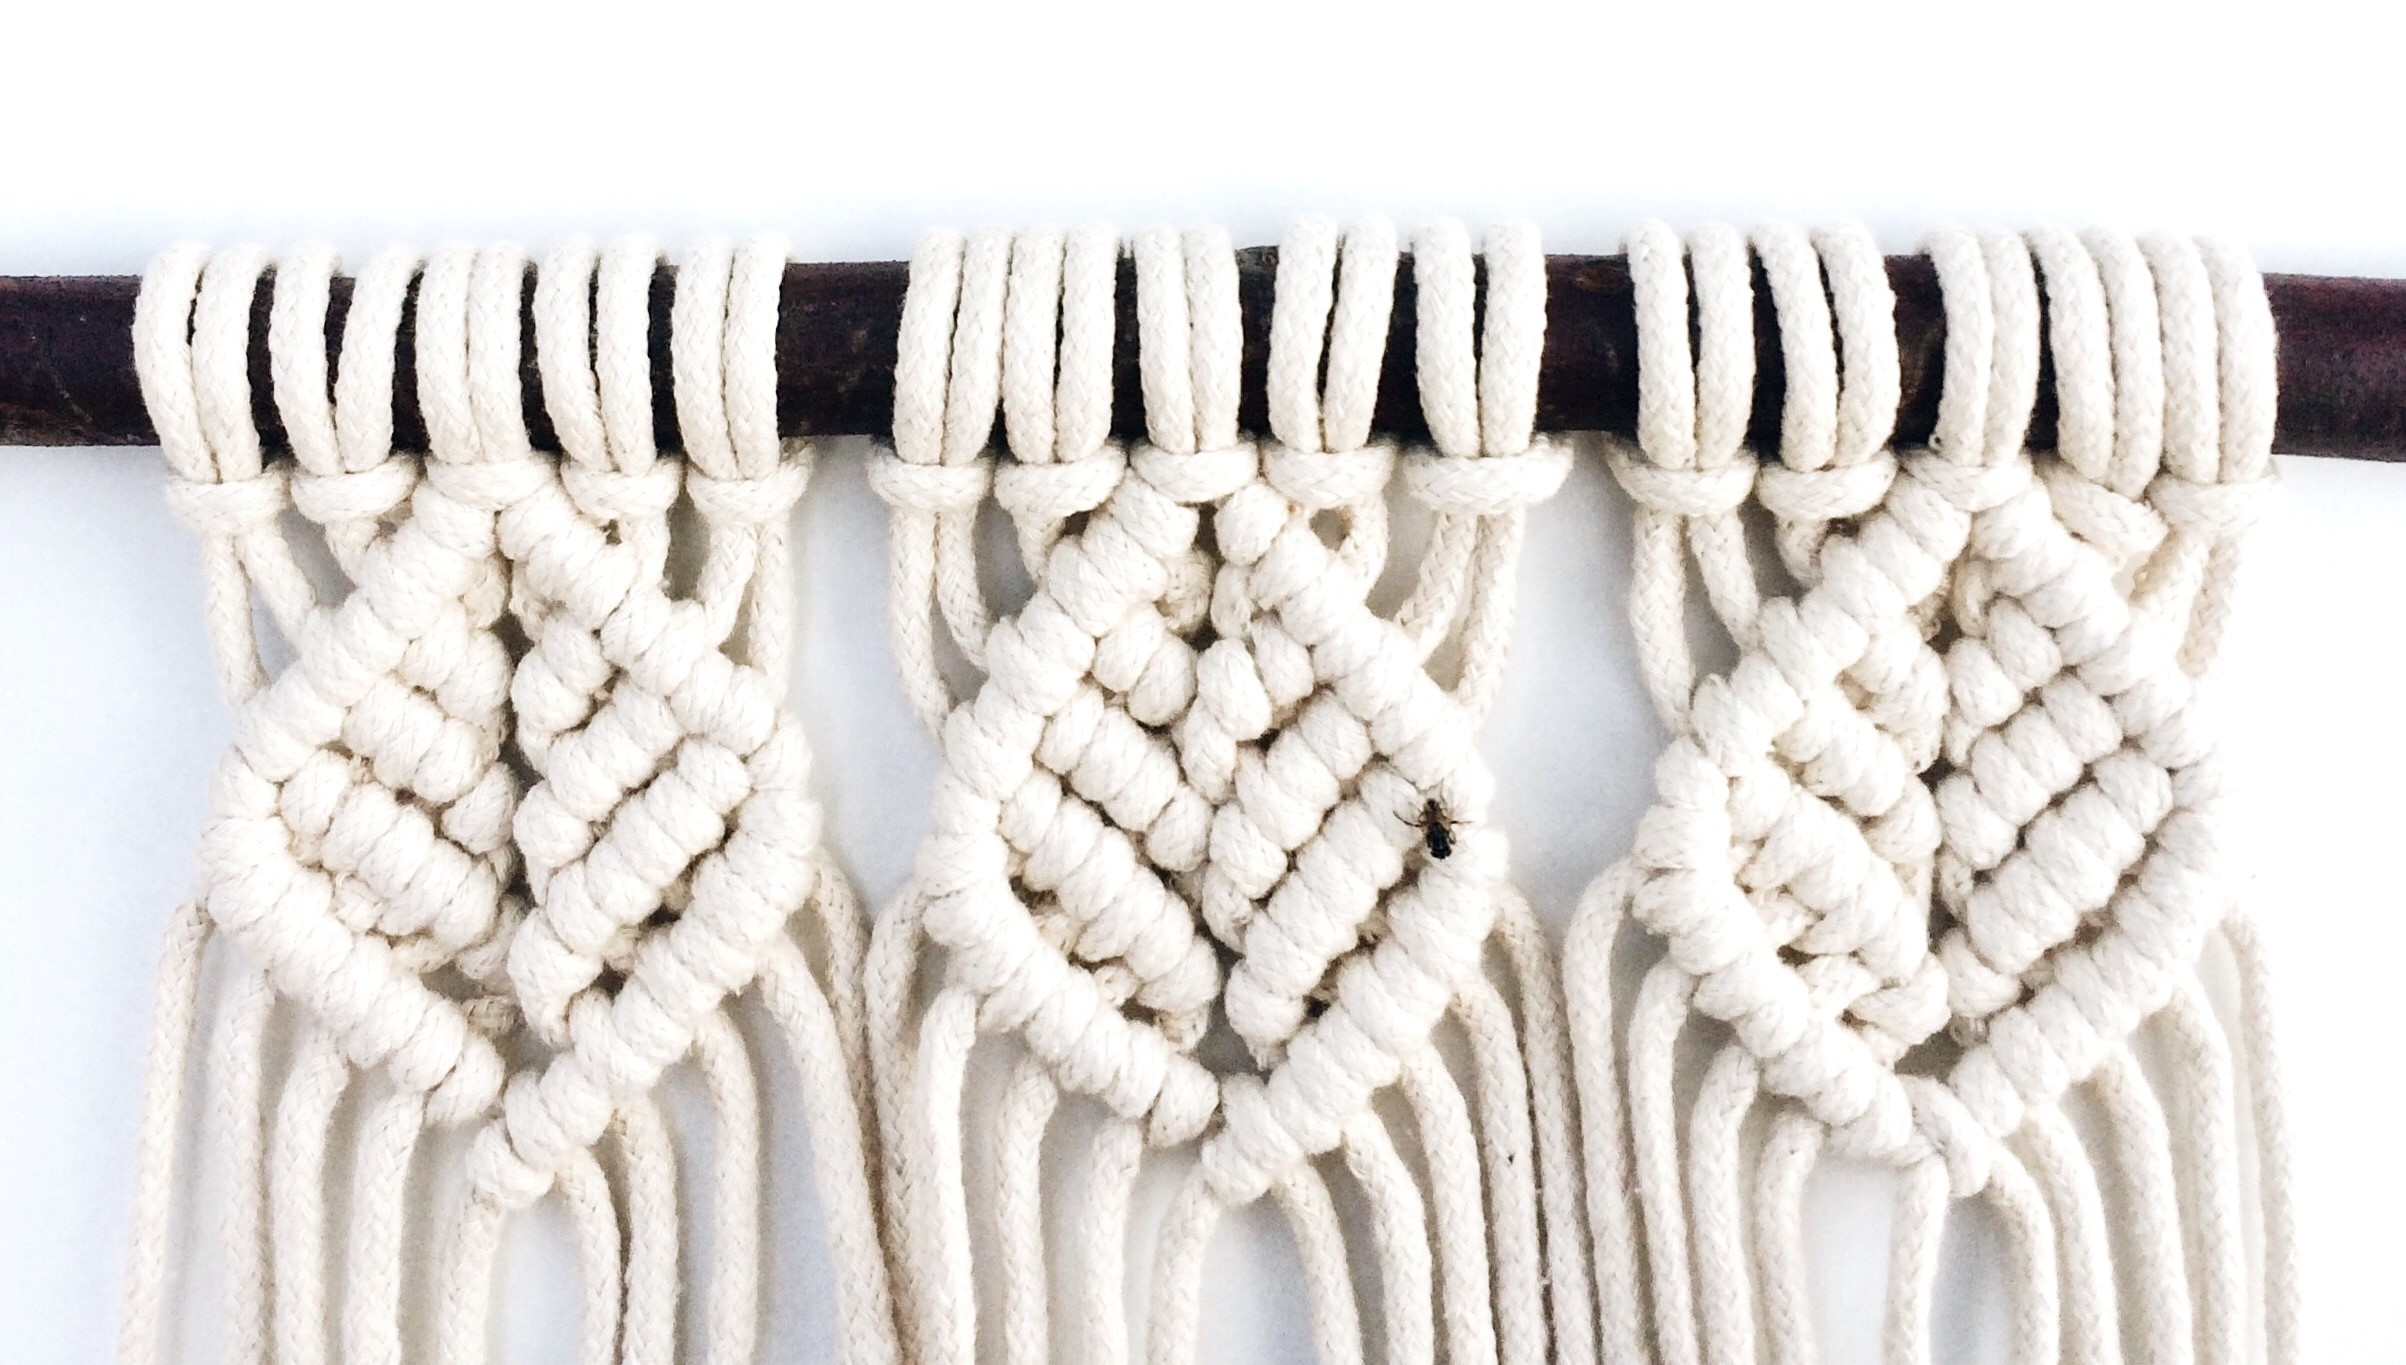 Macrame Wall Hanging Workshop – Assembly: gather + create